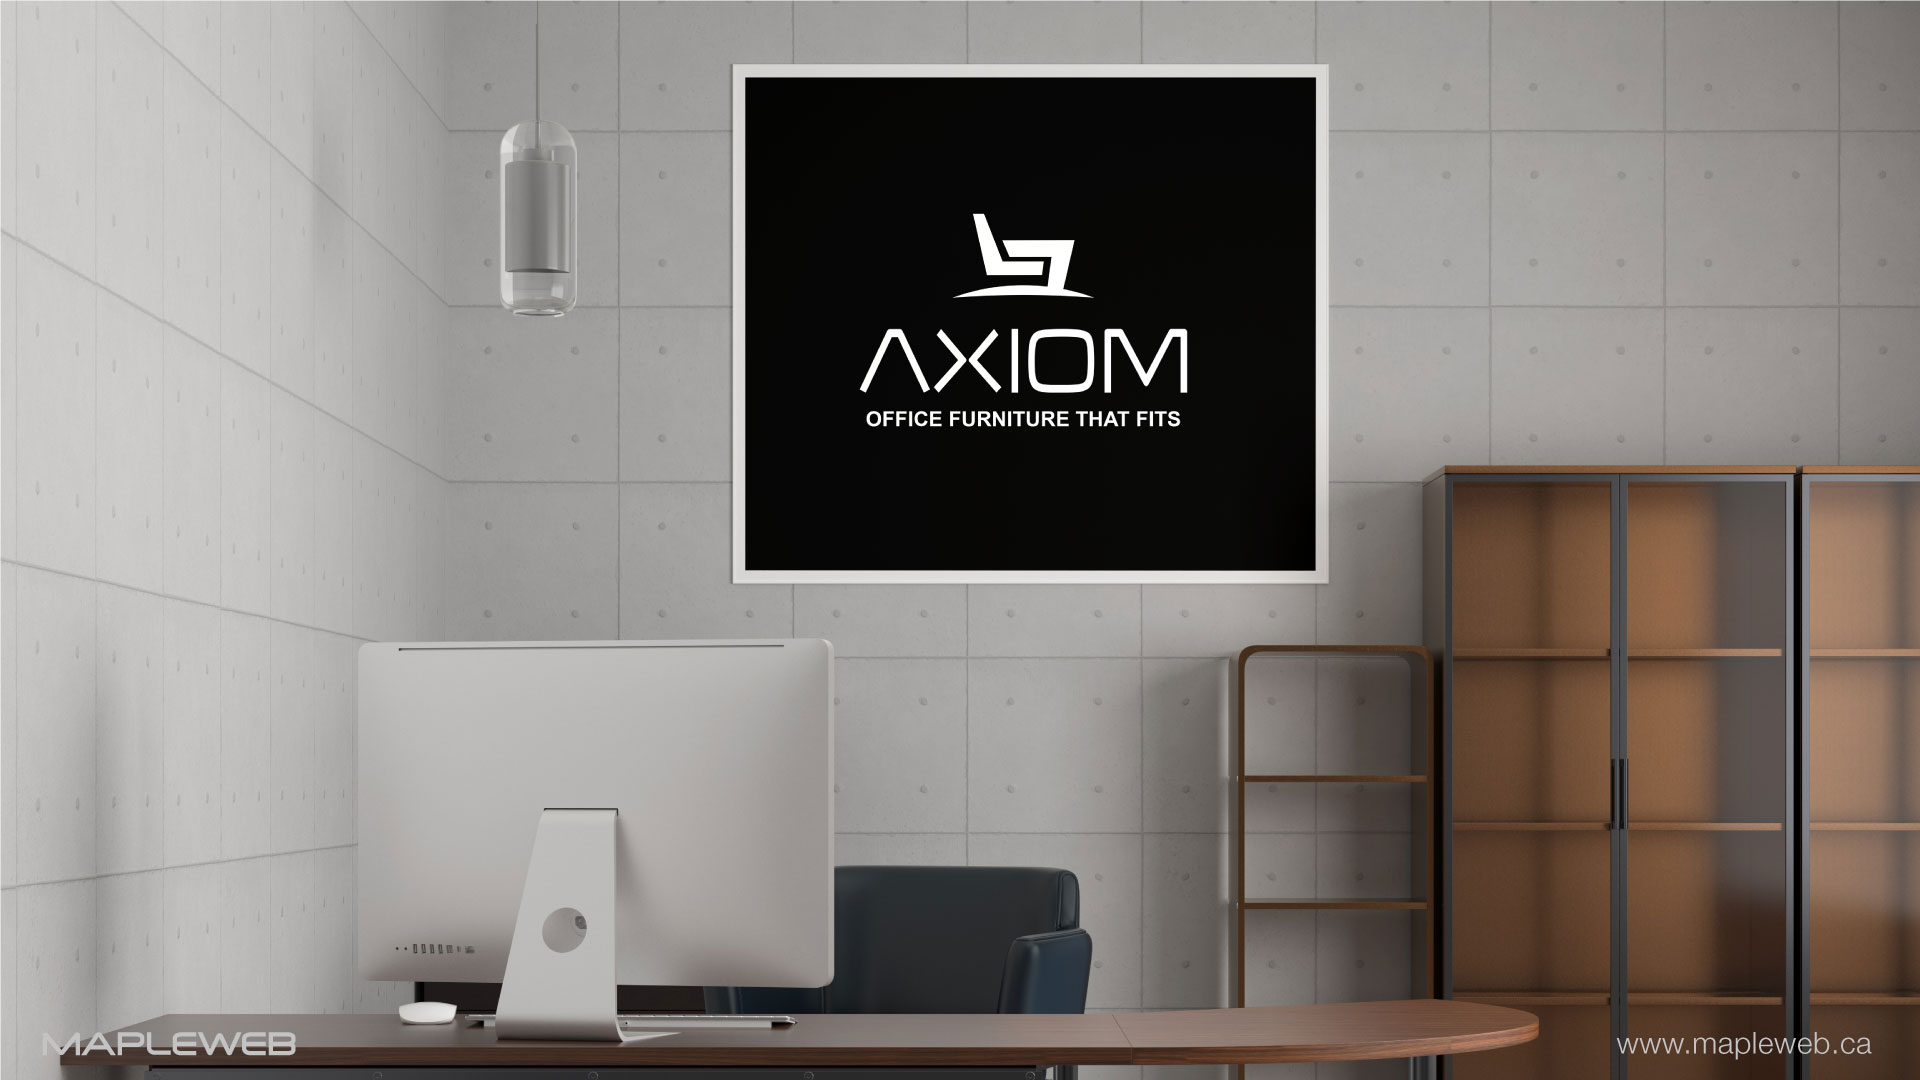 axiom-office furniture-brand-logo-design-by-mapleweb-vancouver-canada-black-sign-mock